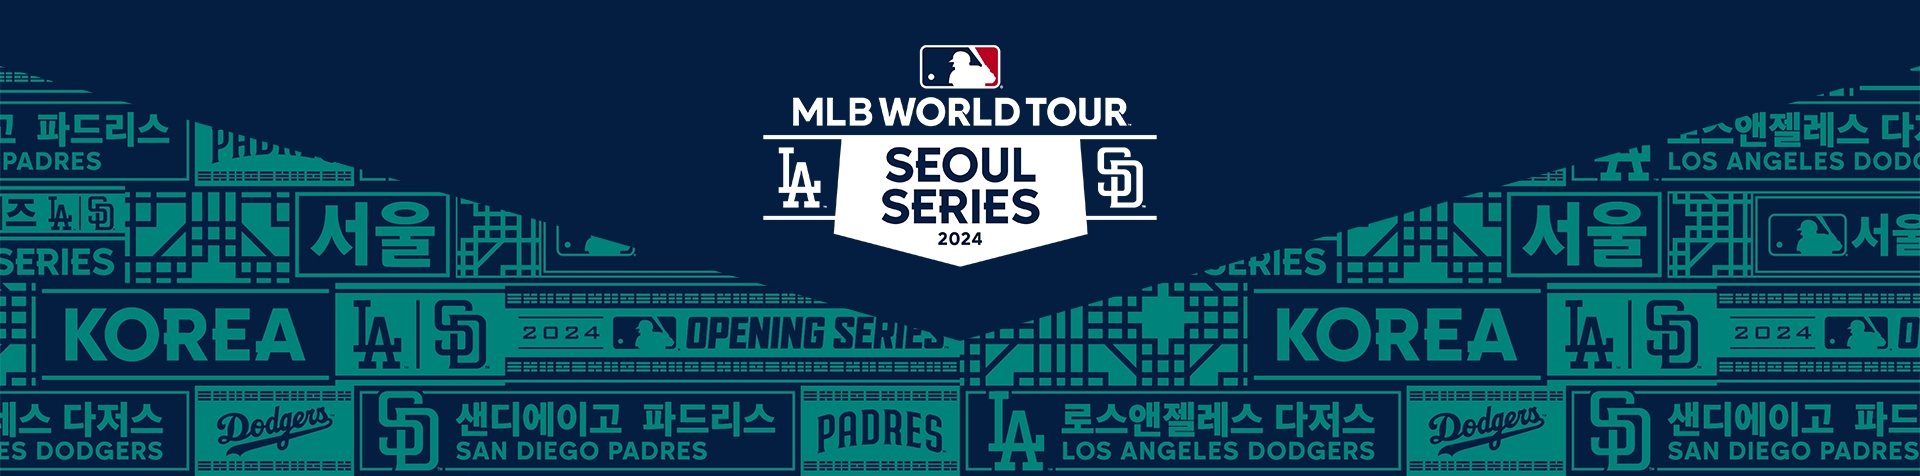 A picture of the MLB World Tour Seoul Series 2024 logo.